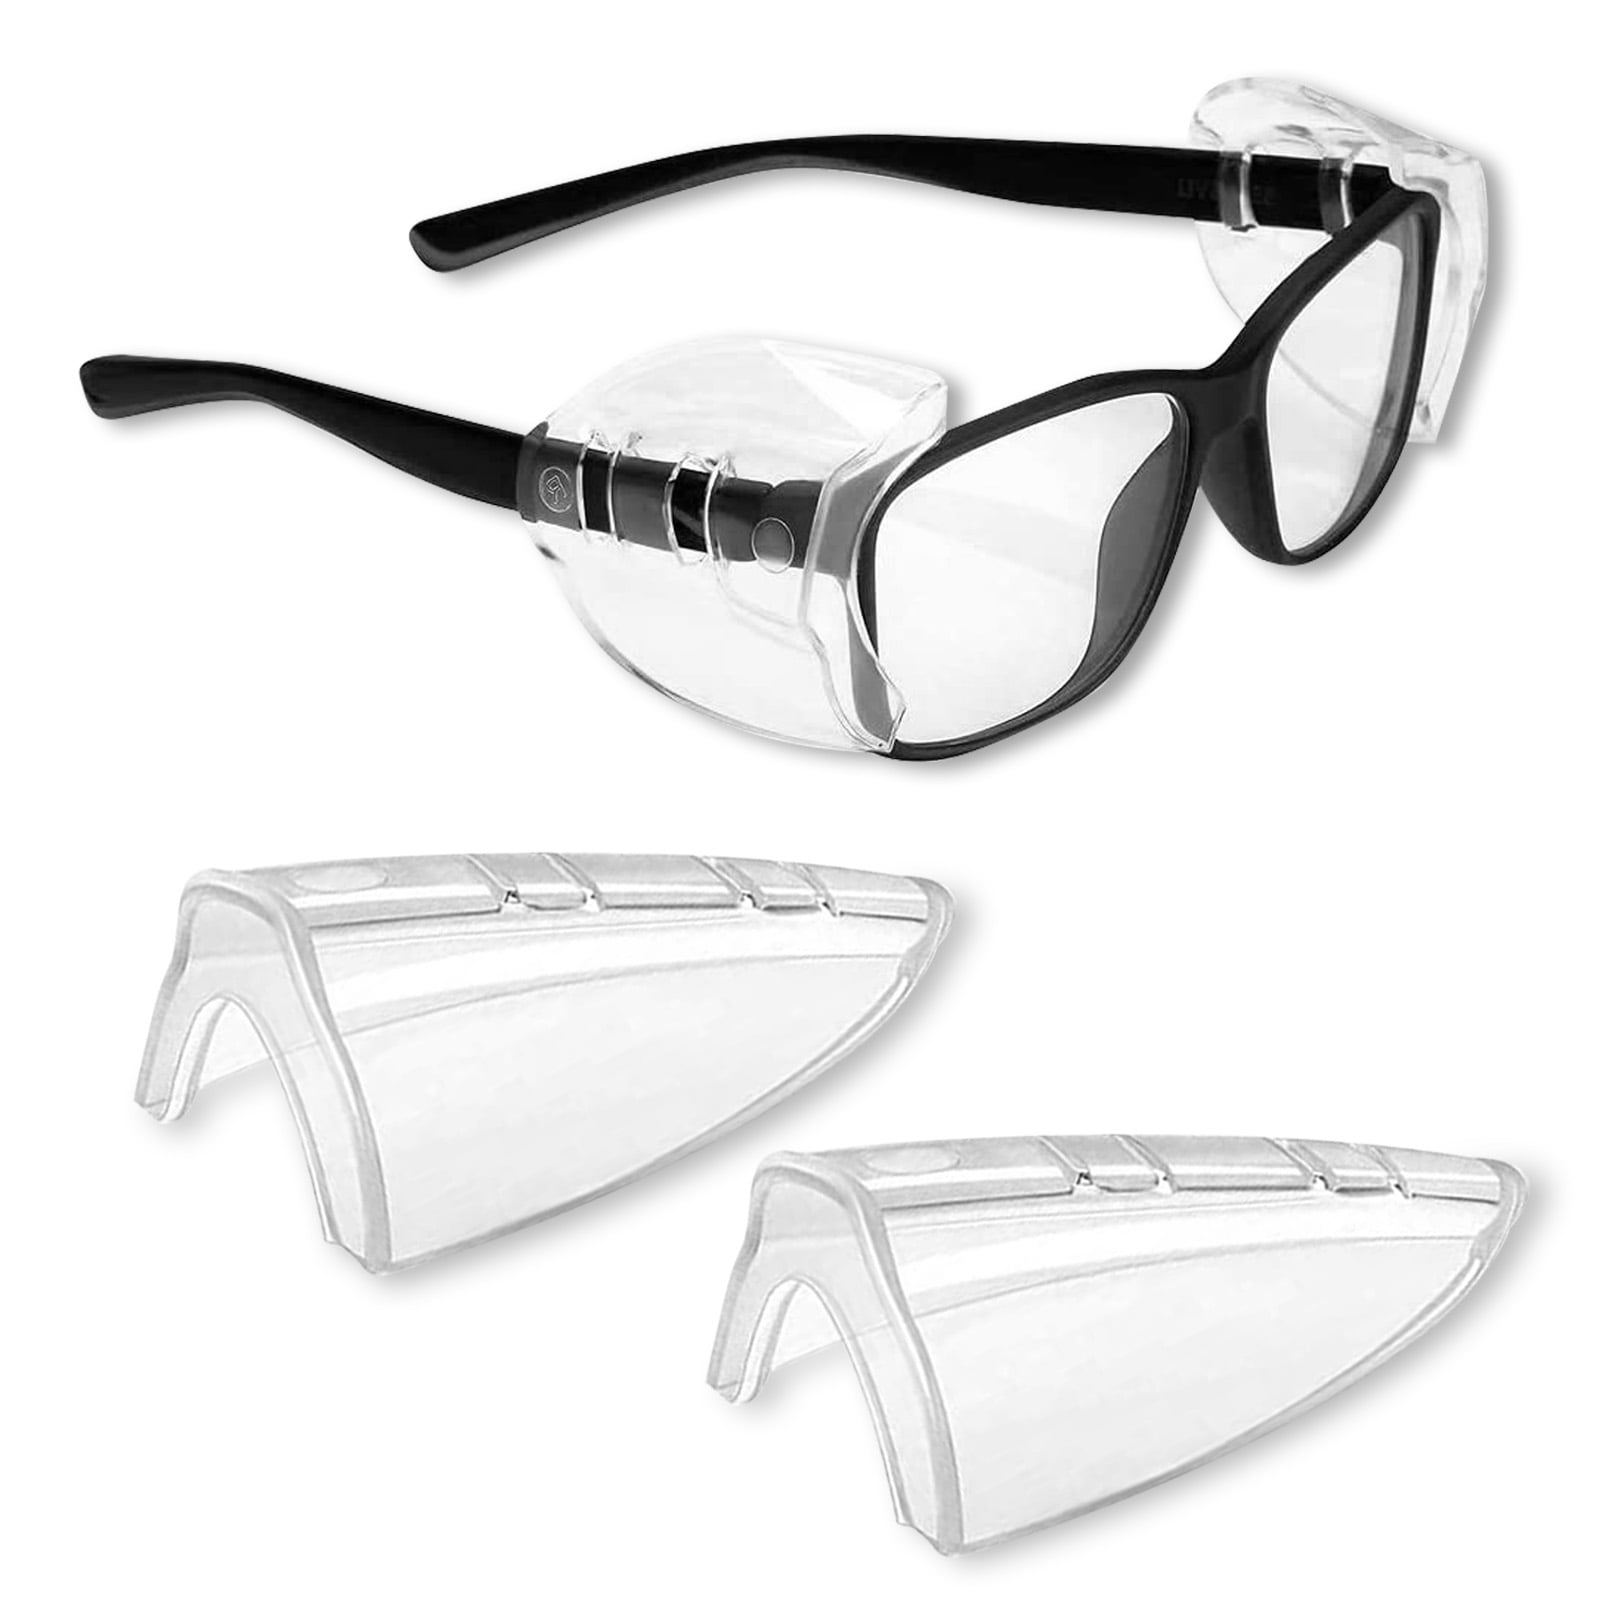 Safety Goggles Work Eye Protection PPE Clear New Universal Protective Eyewear 